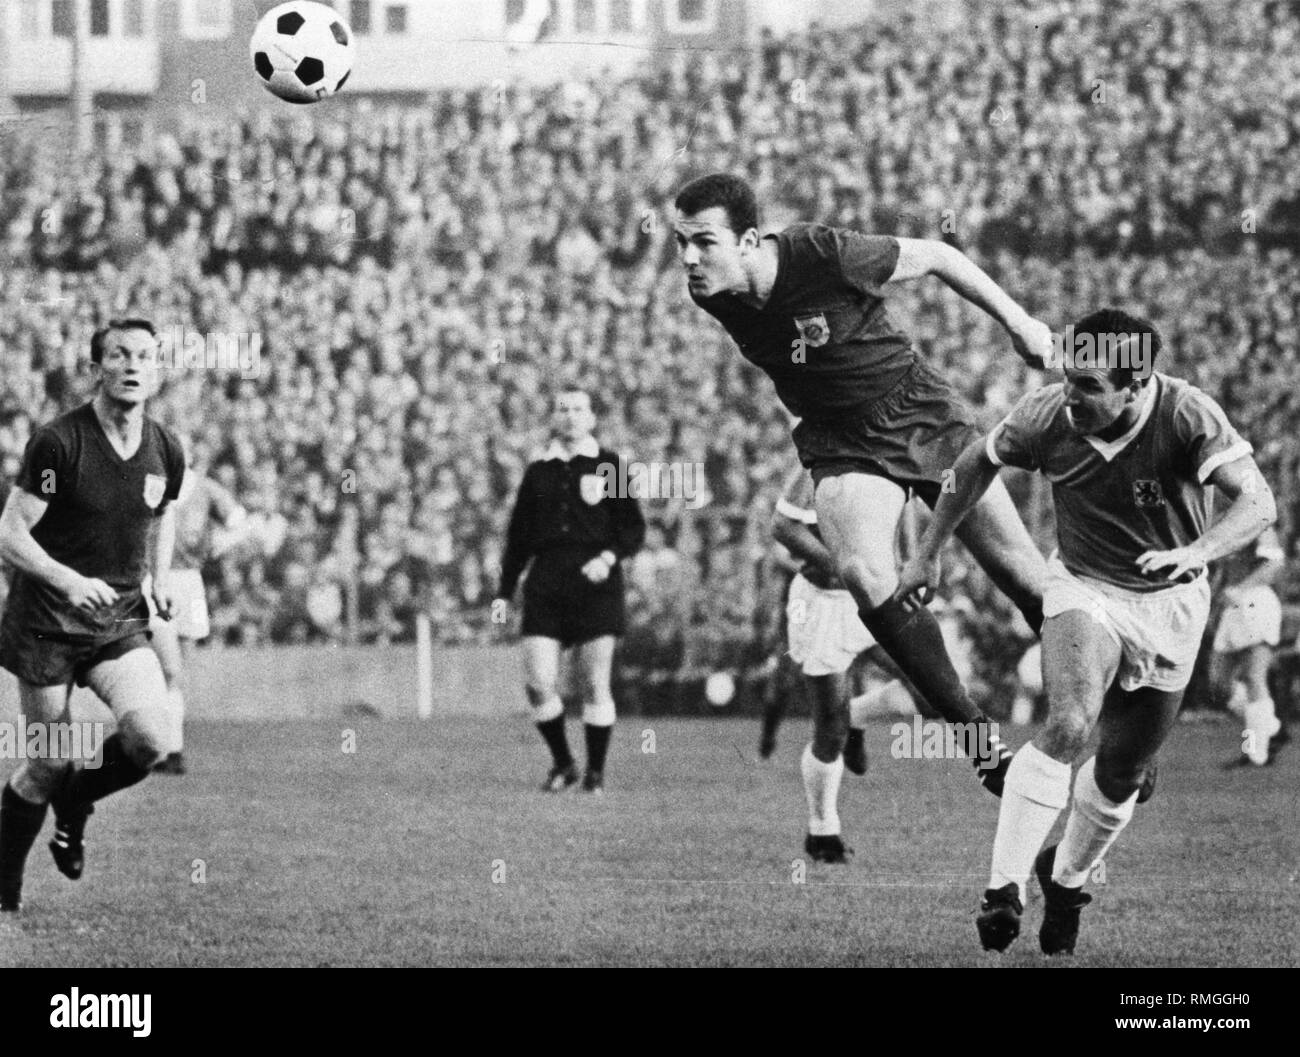 Football 1st Bundesliga 1966/67: Bayern Muenchen - TSV 1860 Muenchen 3: 0. In the picture, Werner Olk (l.) and Franz Beckenbauer (center, the header) from the victorious FC Bayern during the game at the stadium at Gruenwalder Strasse. The 'Lion' Rudi Brunnenmeier (r.) blunde Stock Photo